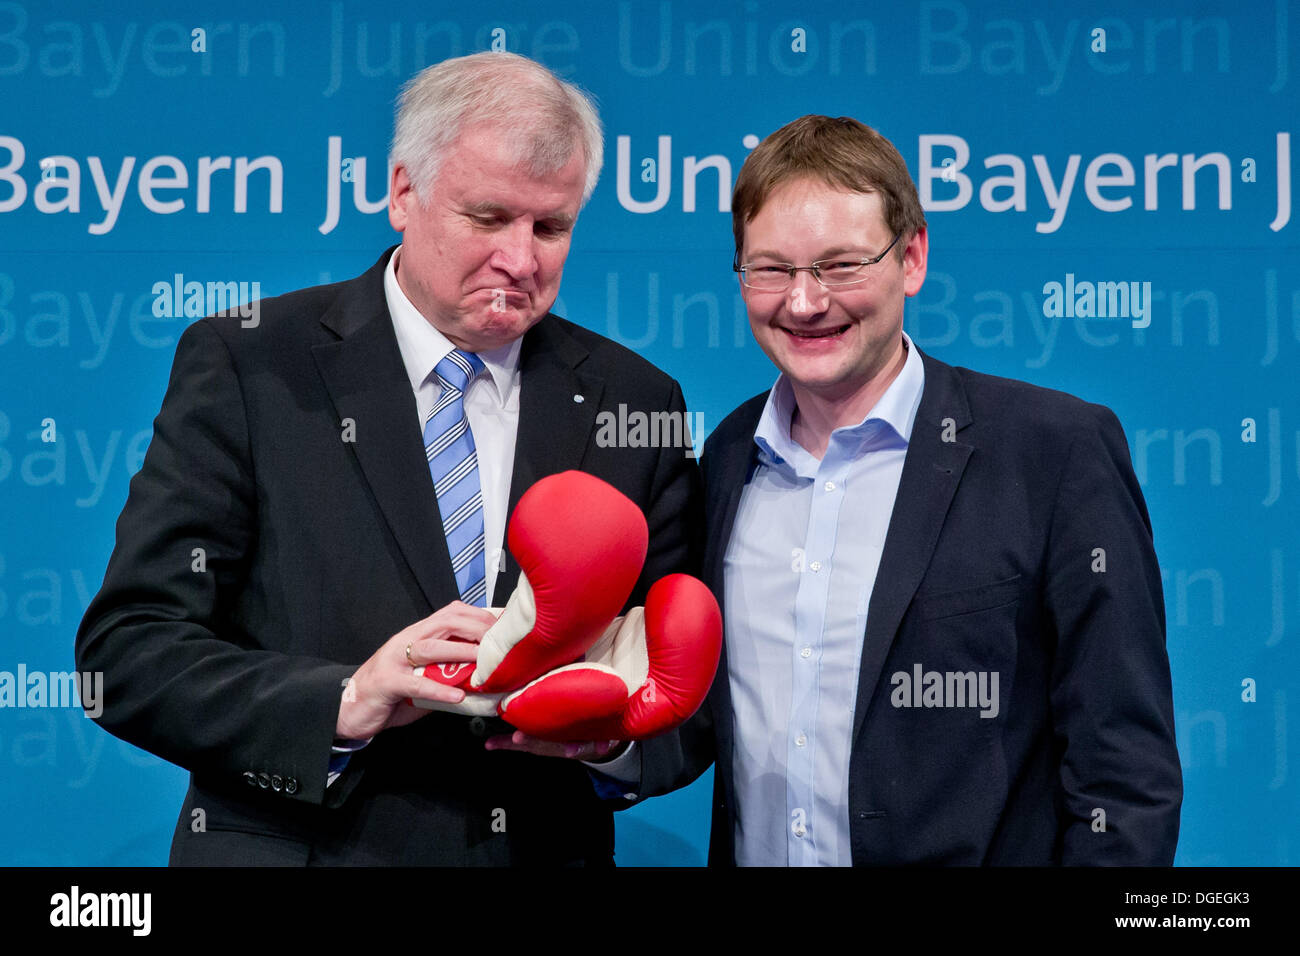 Nuremberg, Germany. 19th Oct, 2013. The new chairman of the Young Union in Bavaria, Hans Reichhart (R), presents a boxing gloves to Bavarian Premier Horst Seehofer at the Young Union party meeting in Nuremberg, Germany, 19 October 2013. Photo: Daniel Karmann/dpa/Alamy Live News Stock Photo